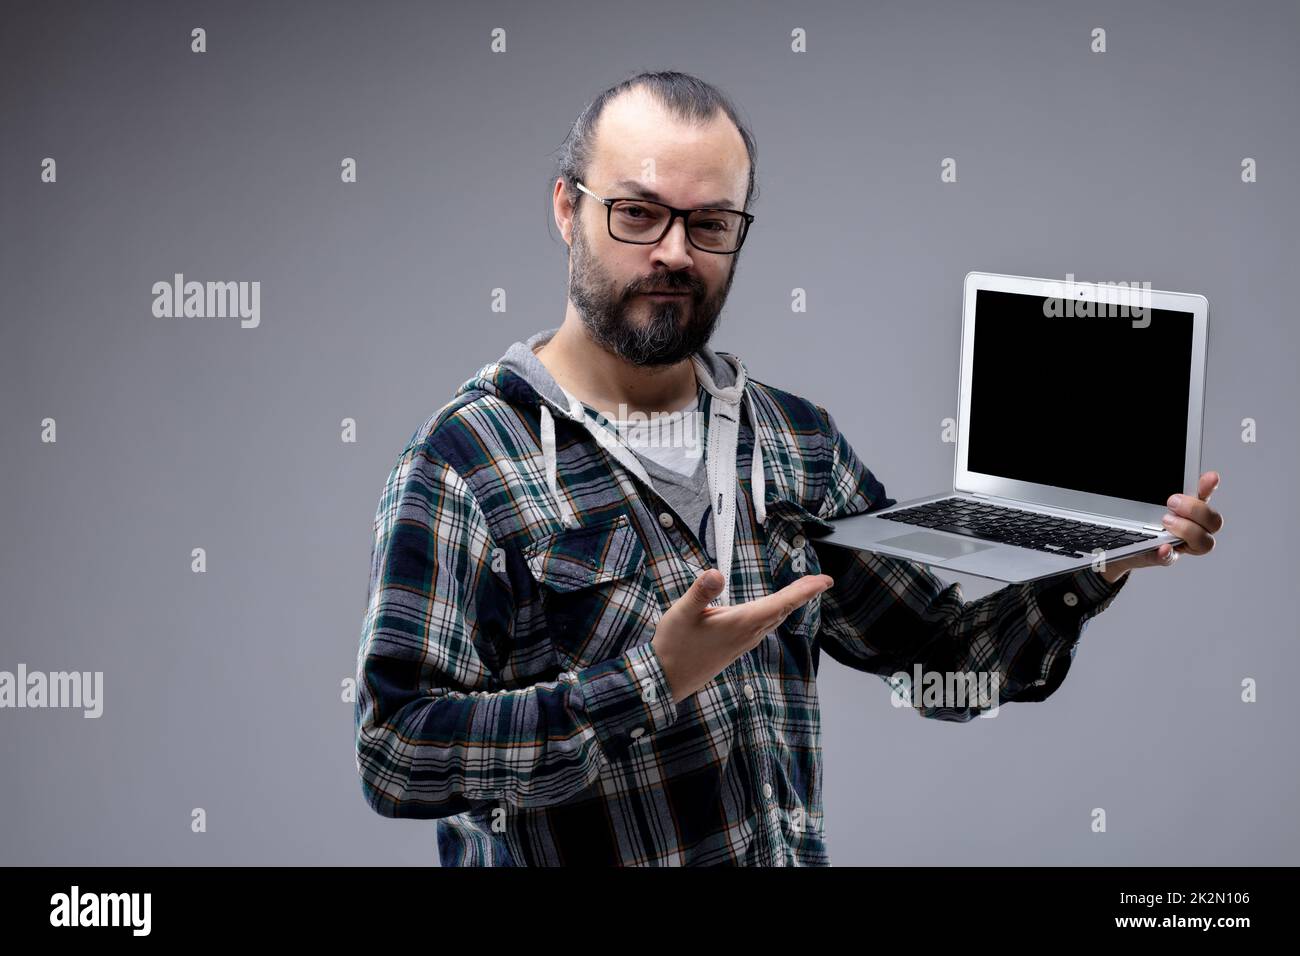 Pleased man pointing to his handheld laptop Stock Photo